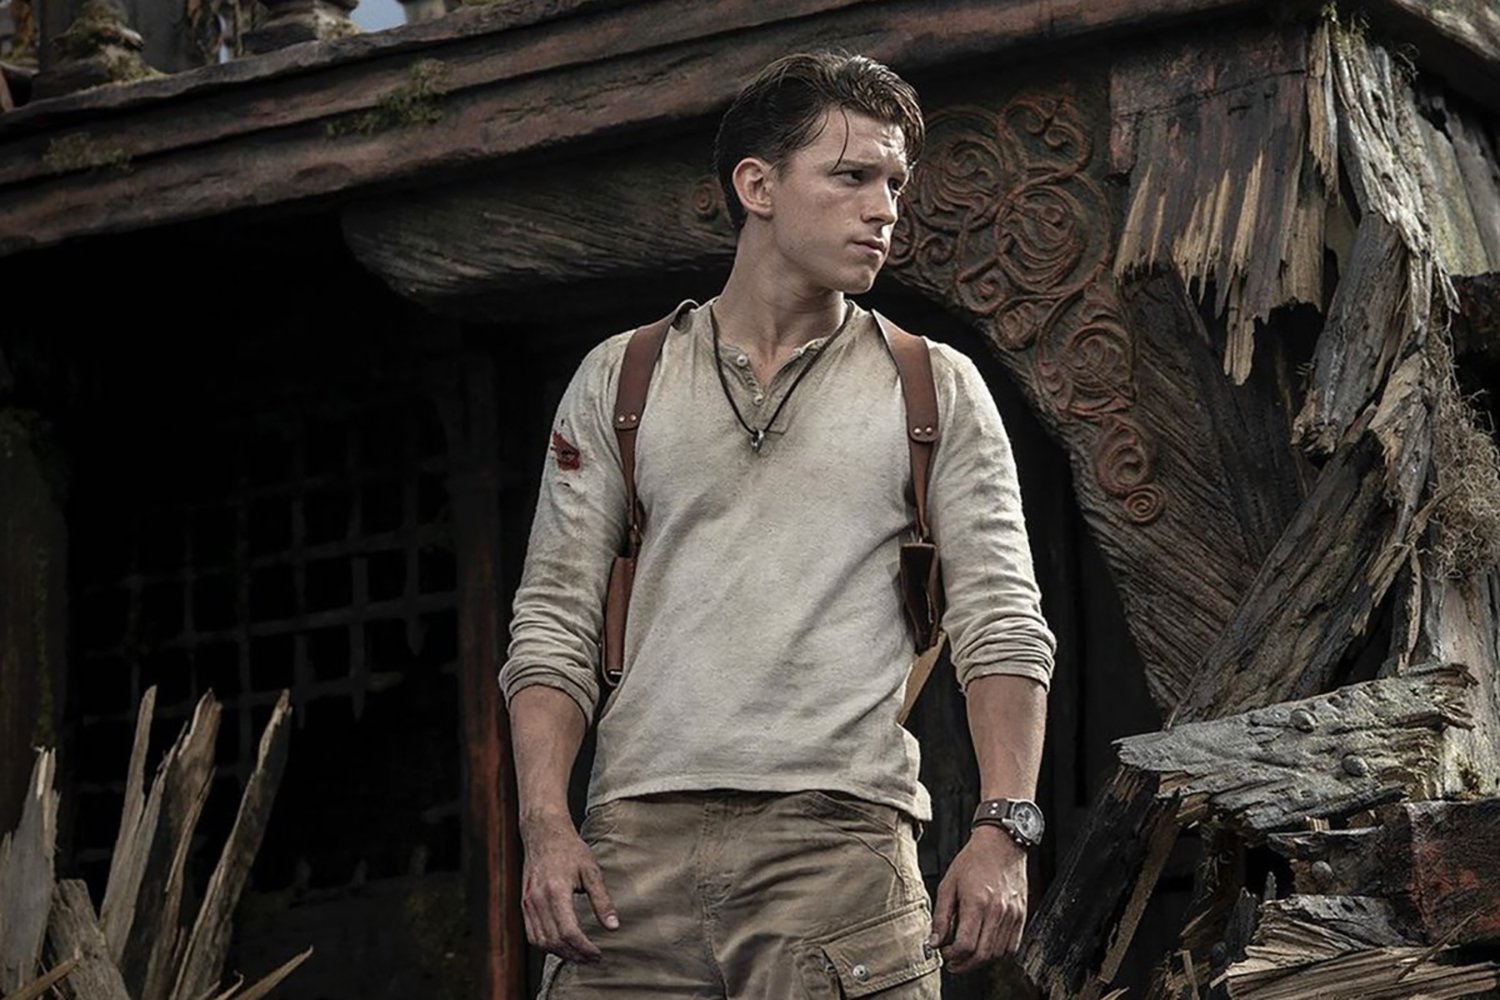 Tom Holland as Nathan Drake in the upcoming 'Uncharted' movie